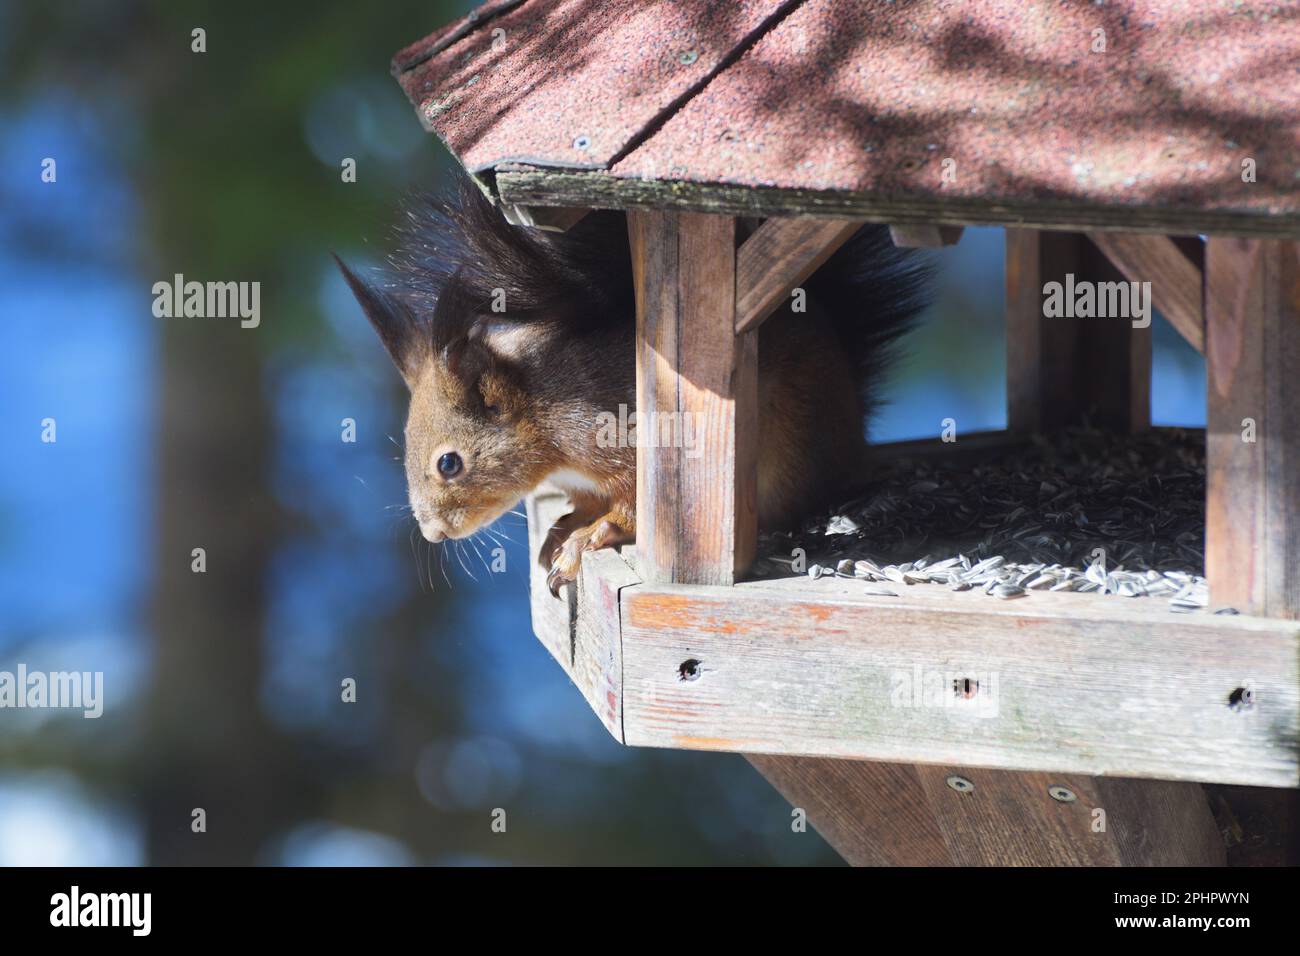 Close-up shot of a cute red squirrel in a bird feeder stealing seeds. Environment, natural habitat and endangered species concepts Stock Photo